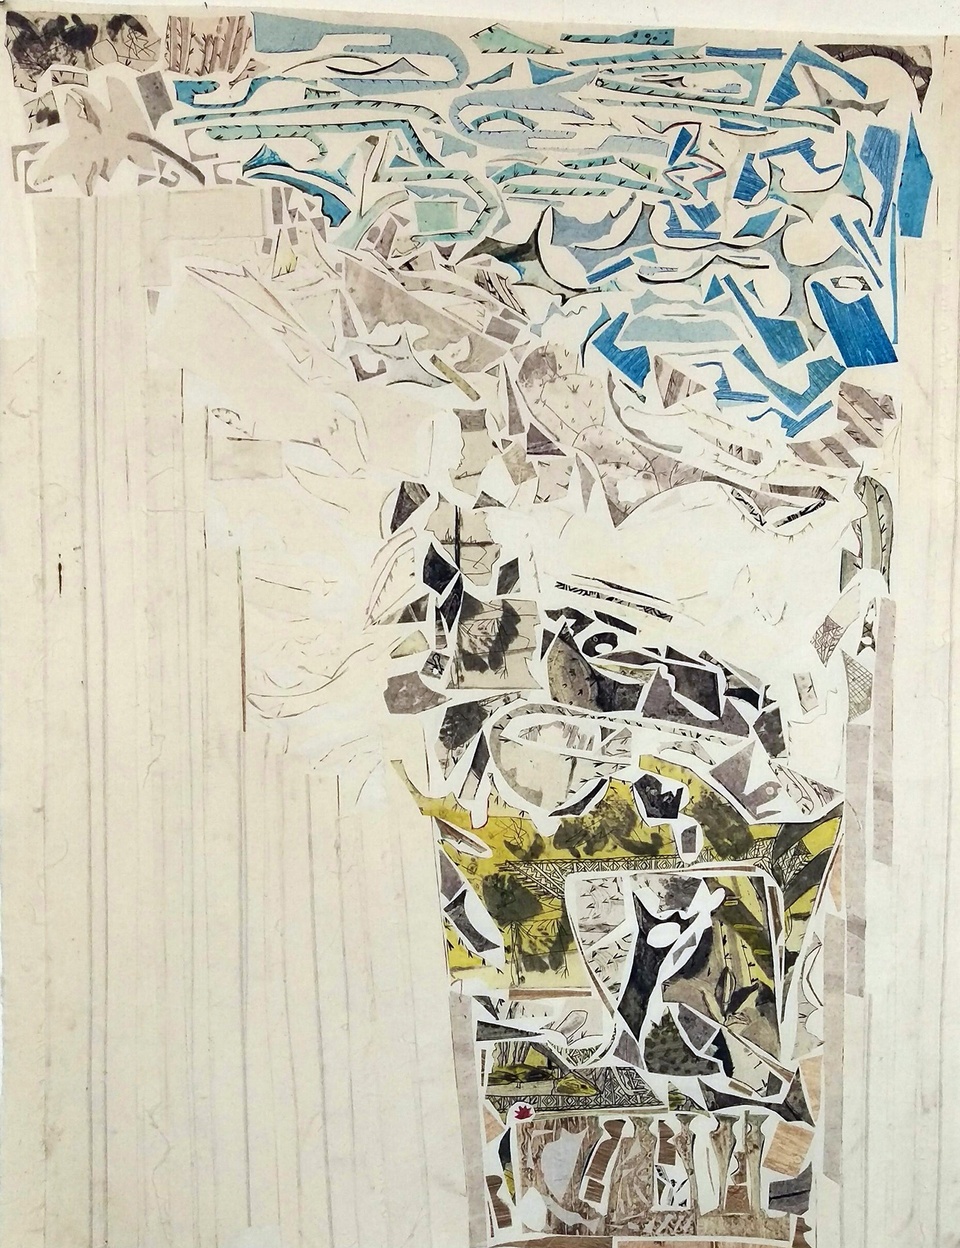 A abstract monoprint collage of off-white, taupe, yellow, and blue shapes